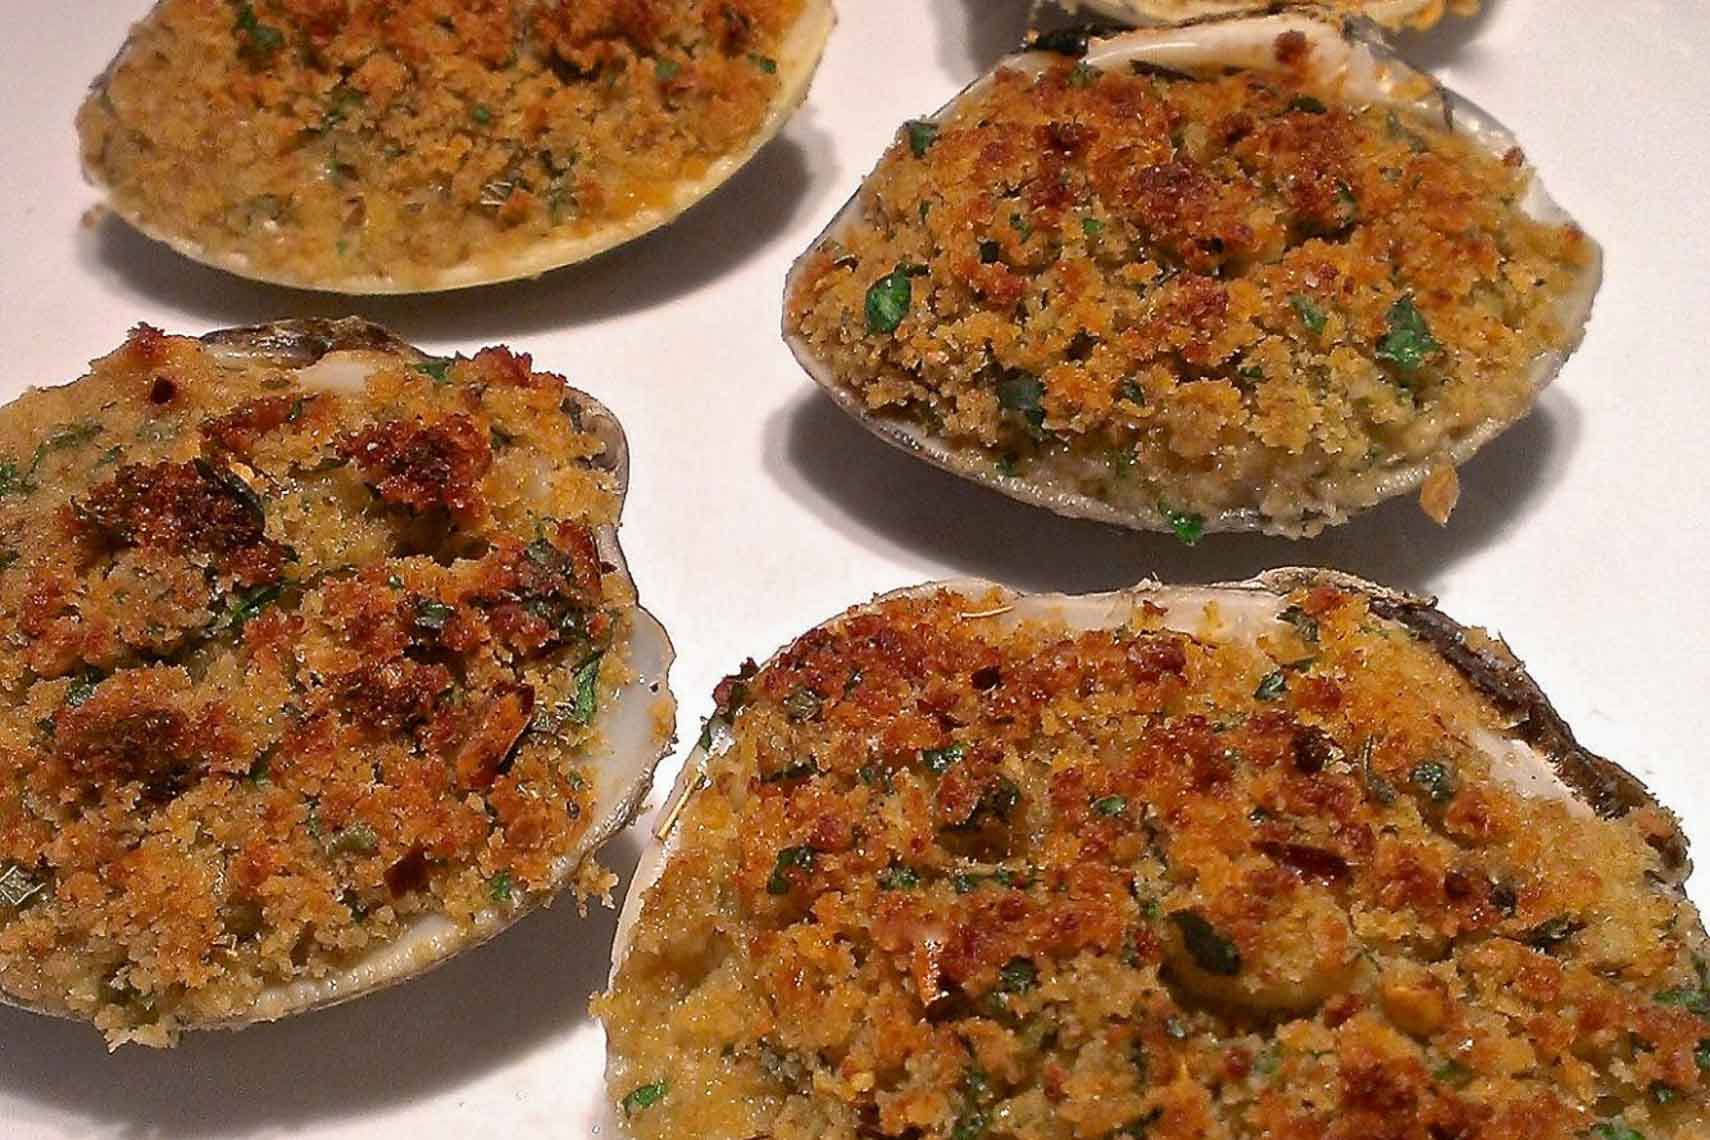 Crumb-Topped Clams Recipe: How to Make It